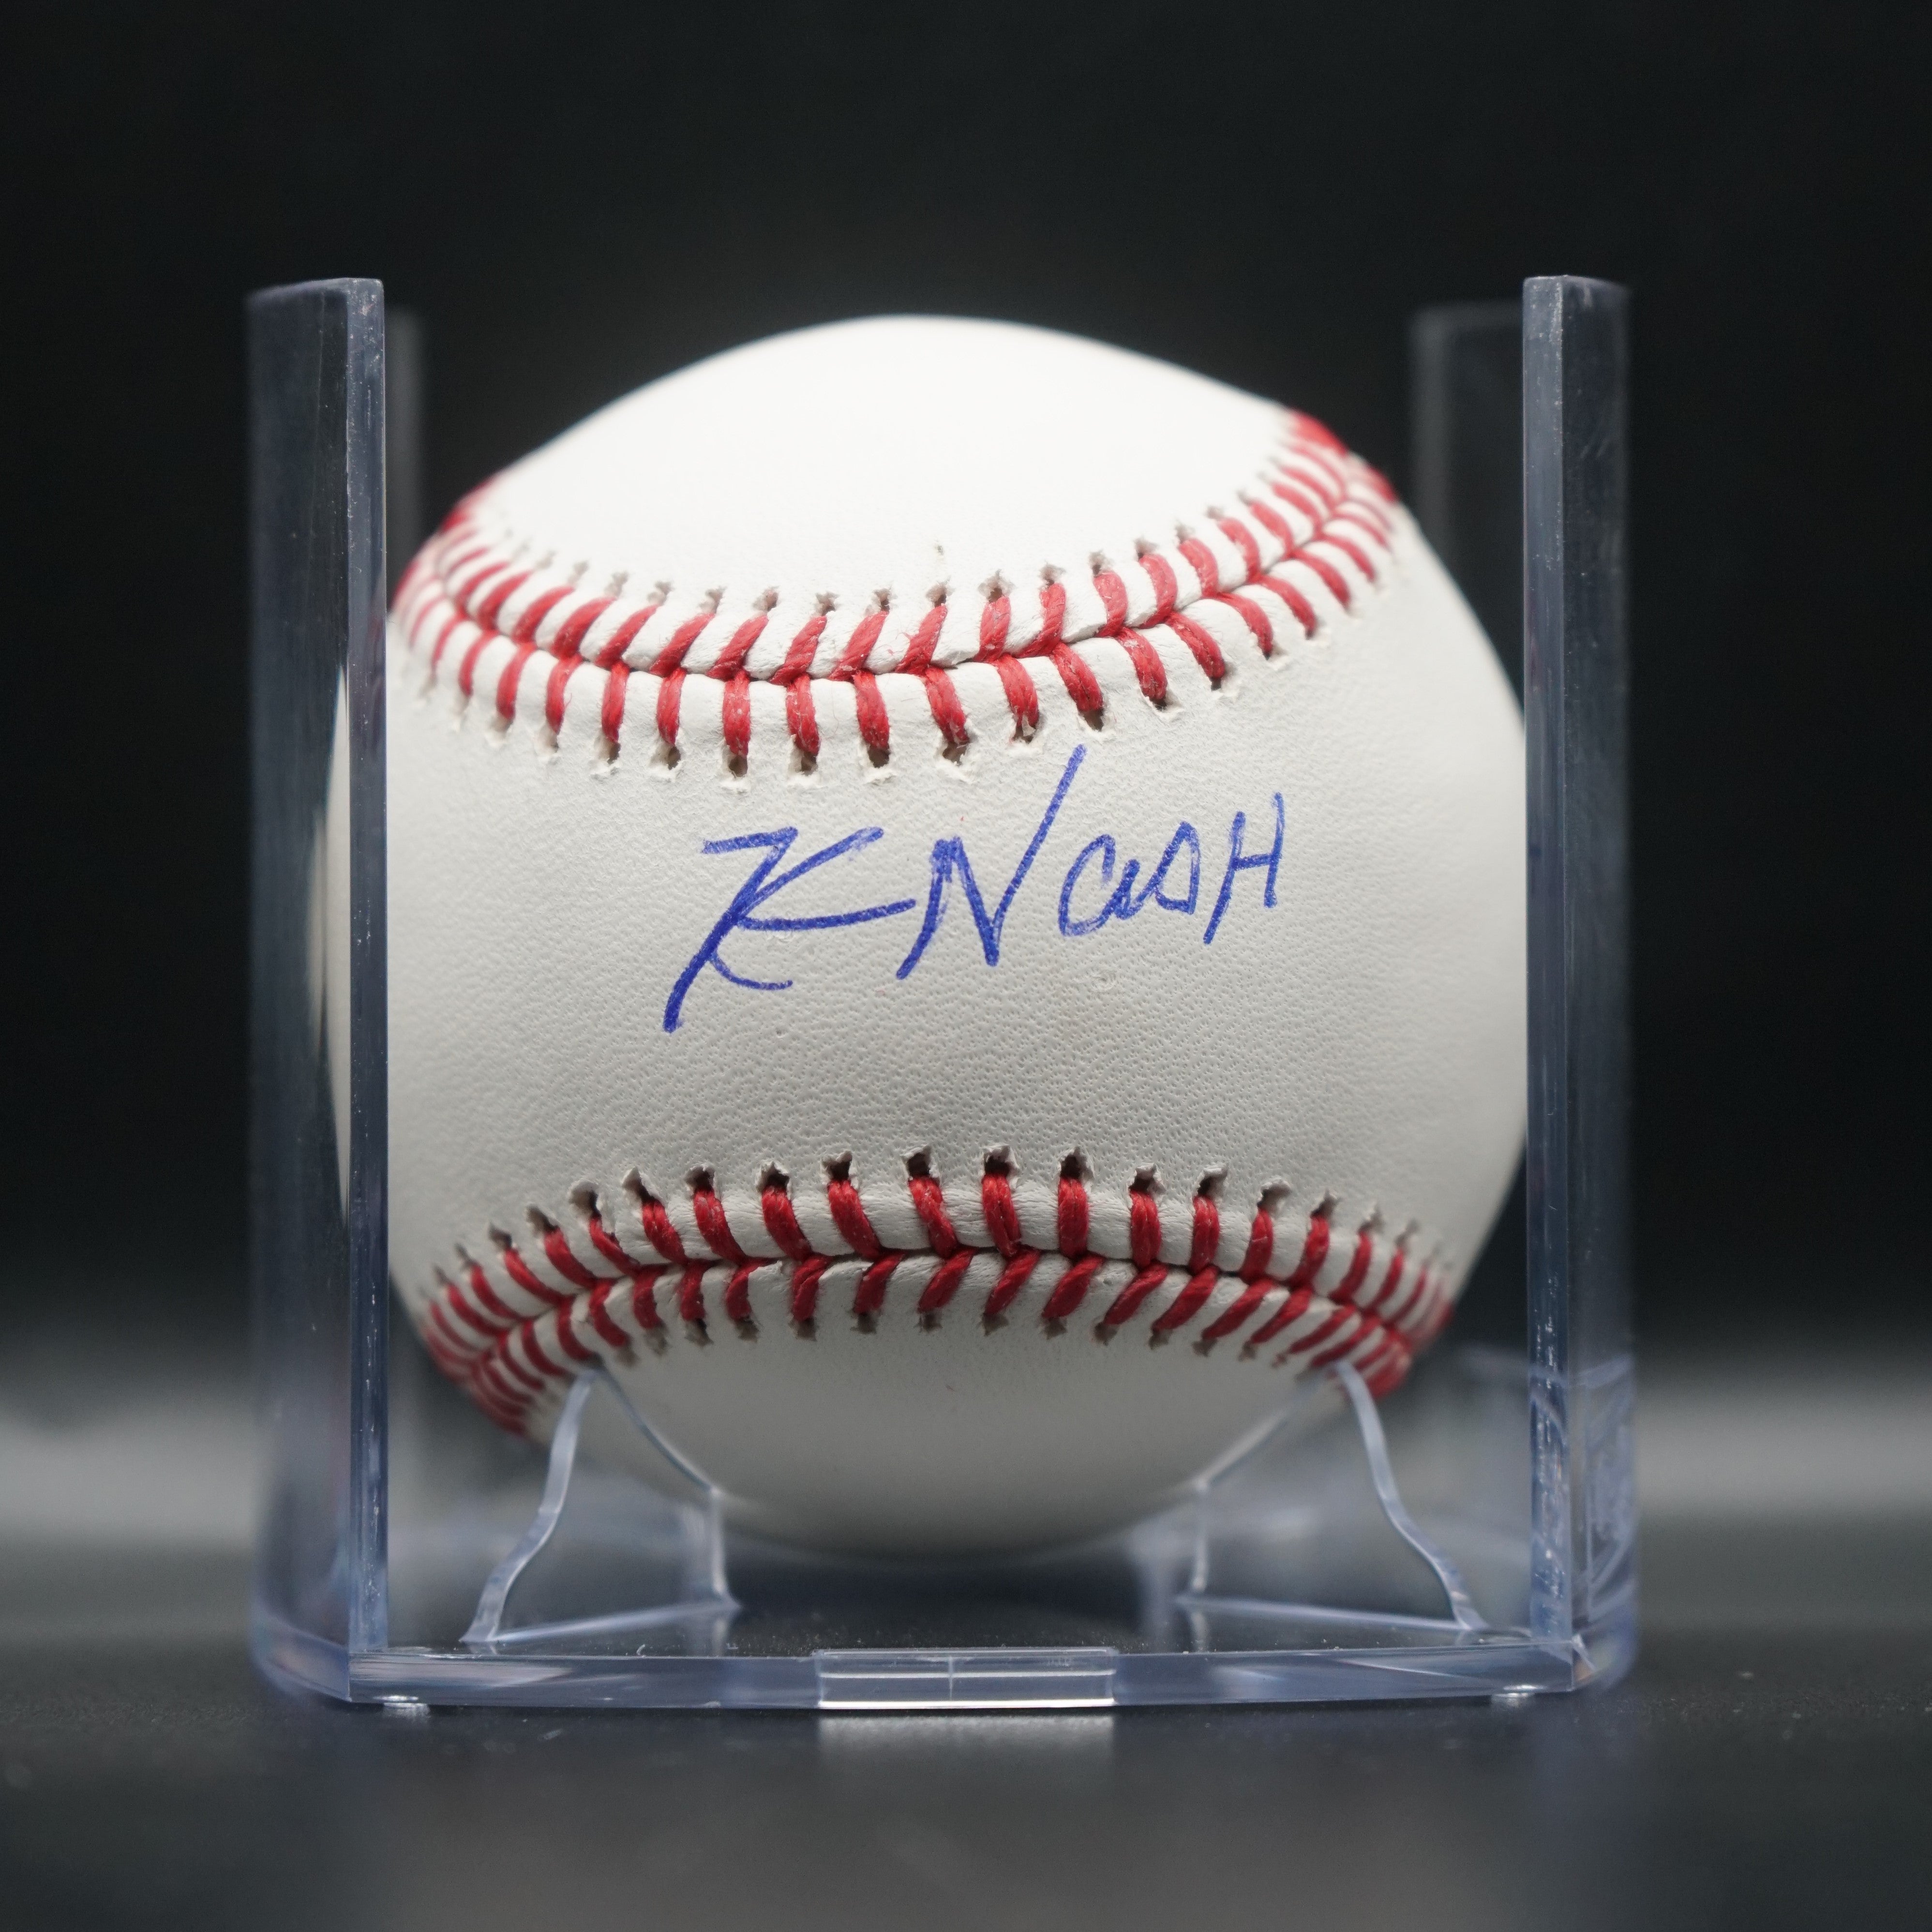 Sold at Auction: Signed Baseball with COA